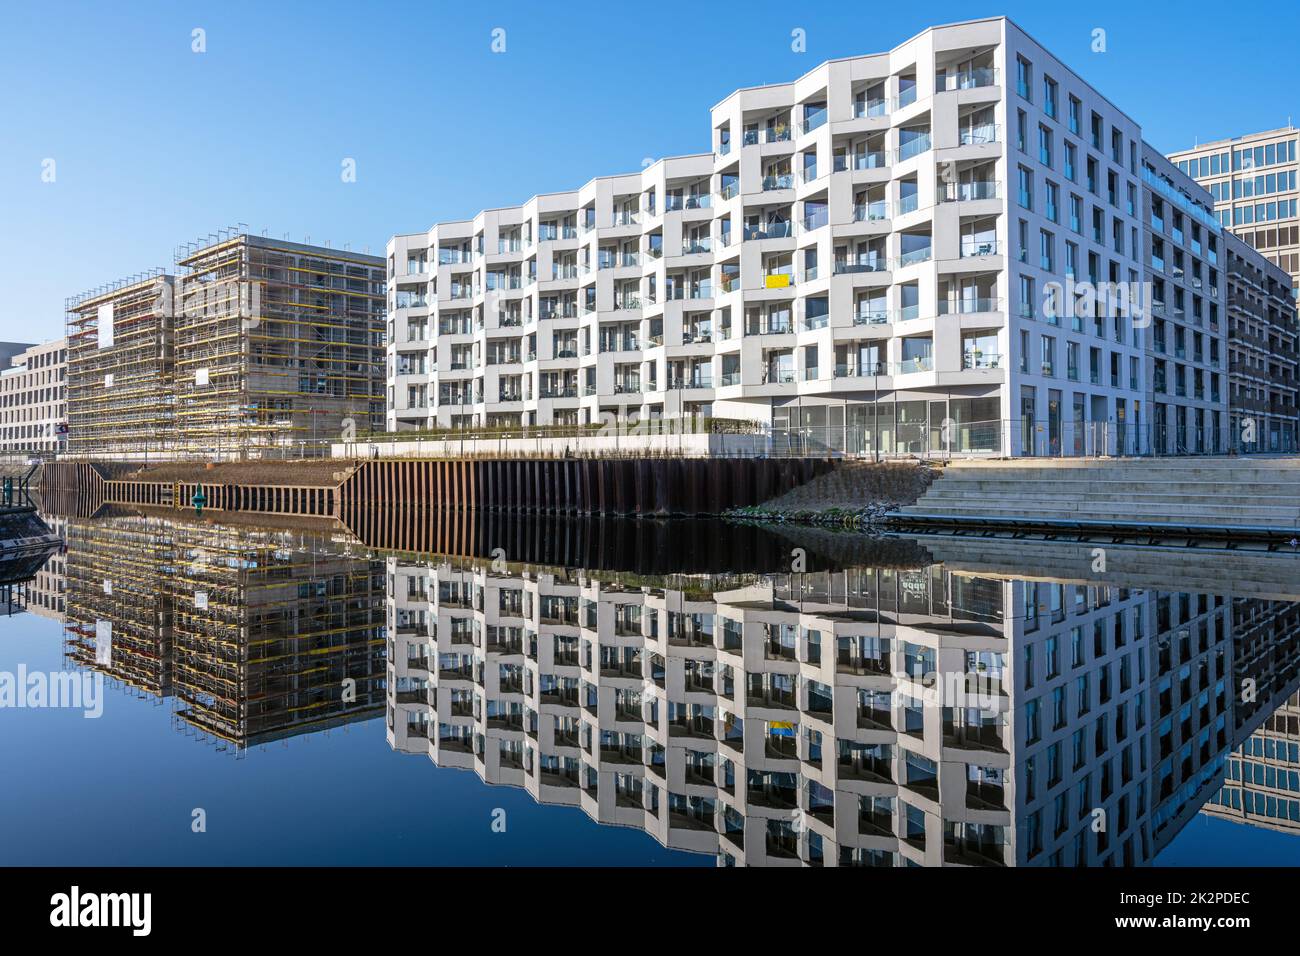 New apartment building and a construction site for another one seen in Berlin, Germany Stock Photo